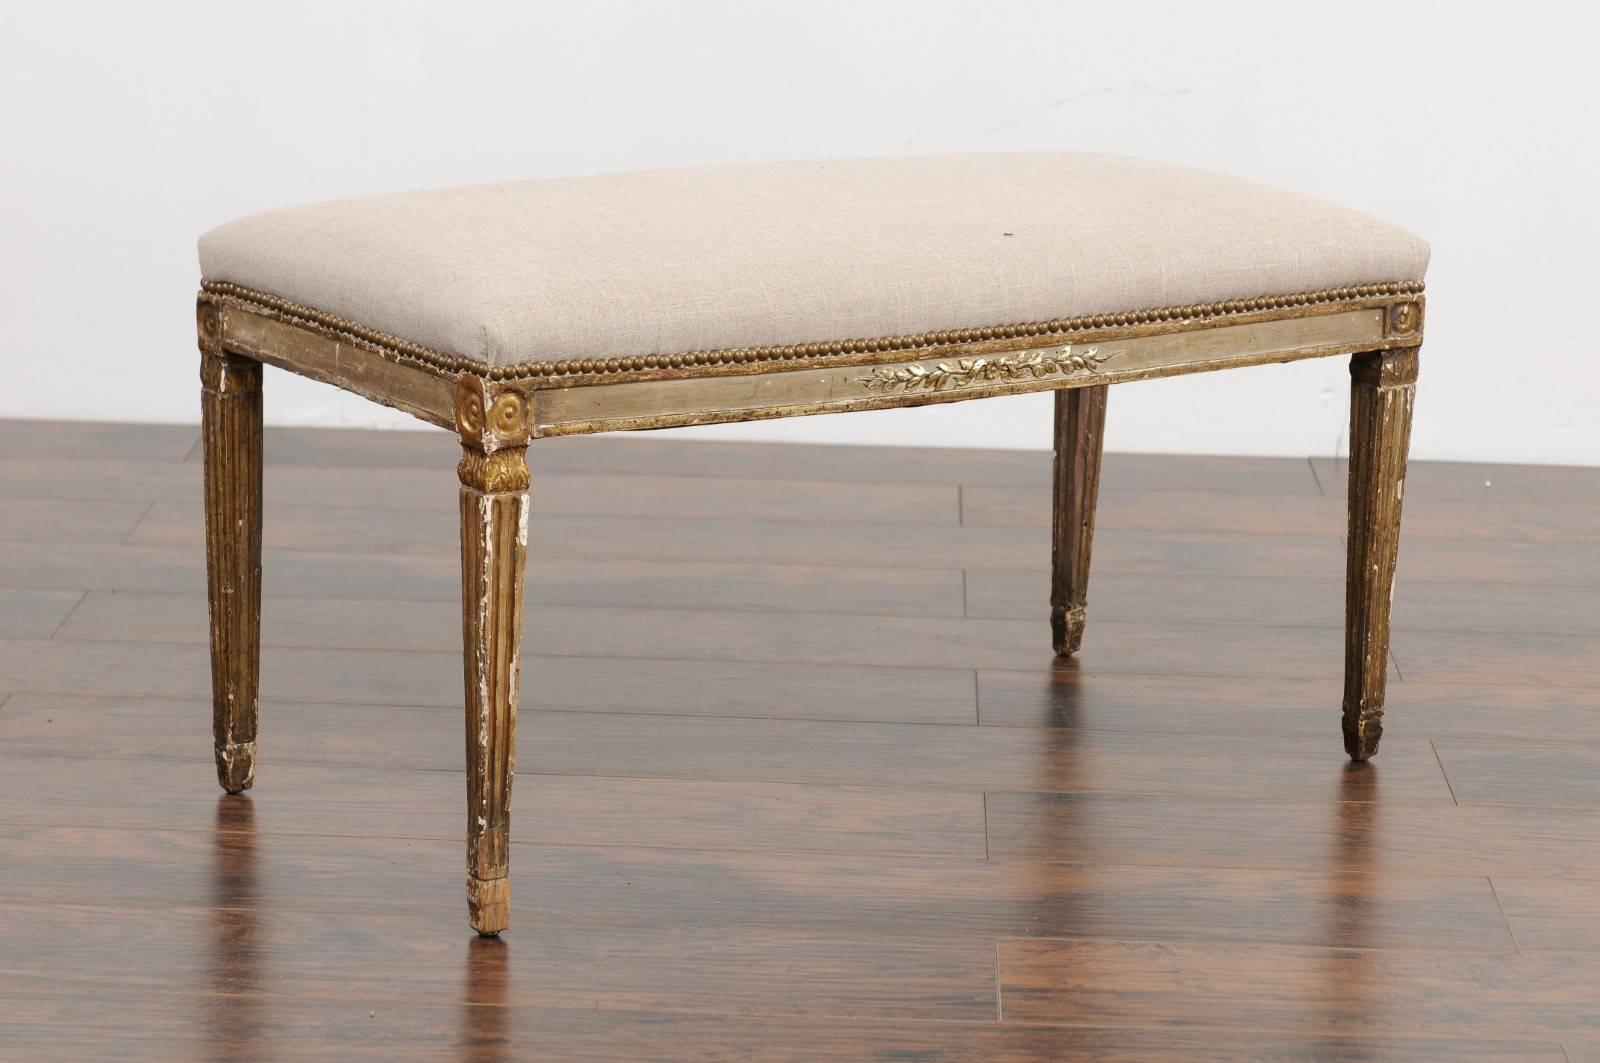 An Italian neoclassical period painted bench from the early 19th century, with foliage motif, tapered legs and new upholstery. This exquisite Italian Neoclassical bench features a rectangular seat, covered with a new linen fabric accented by a brass